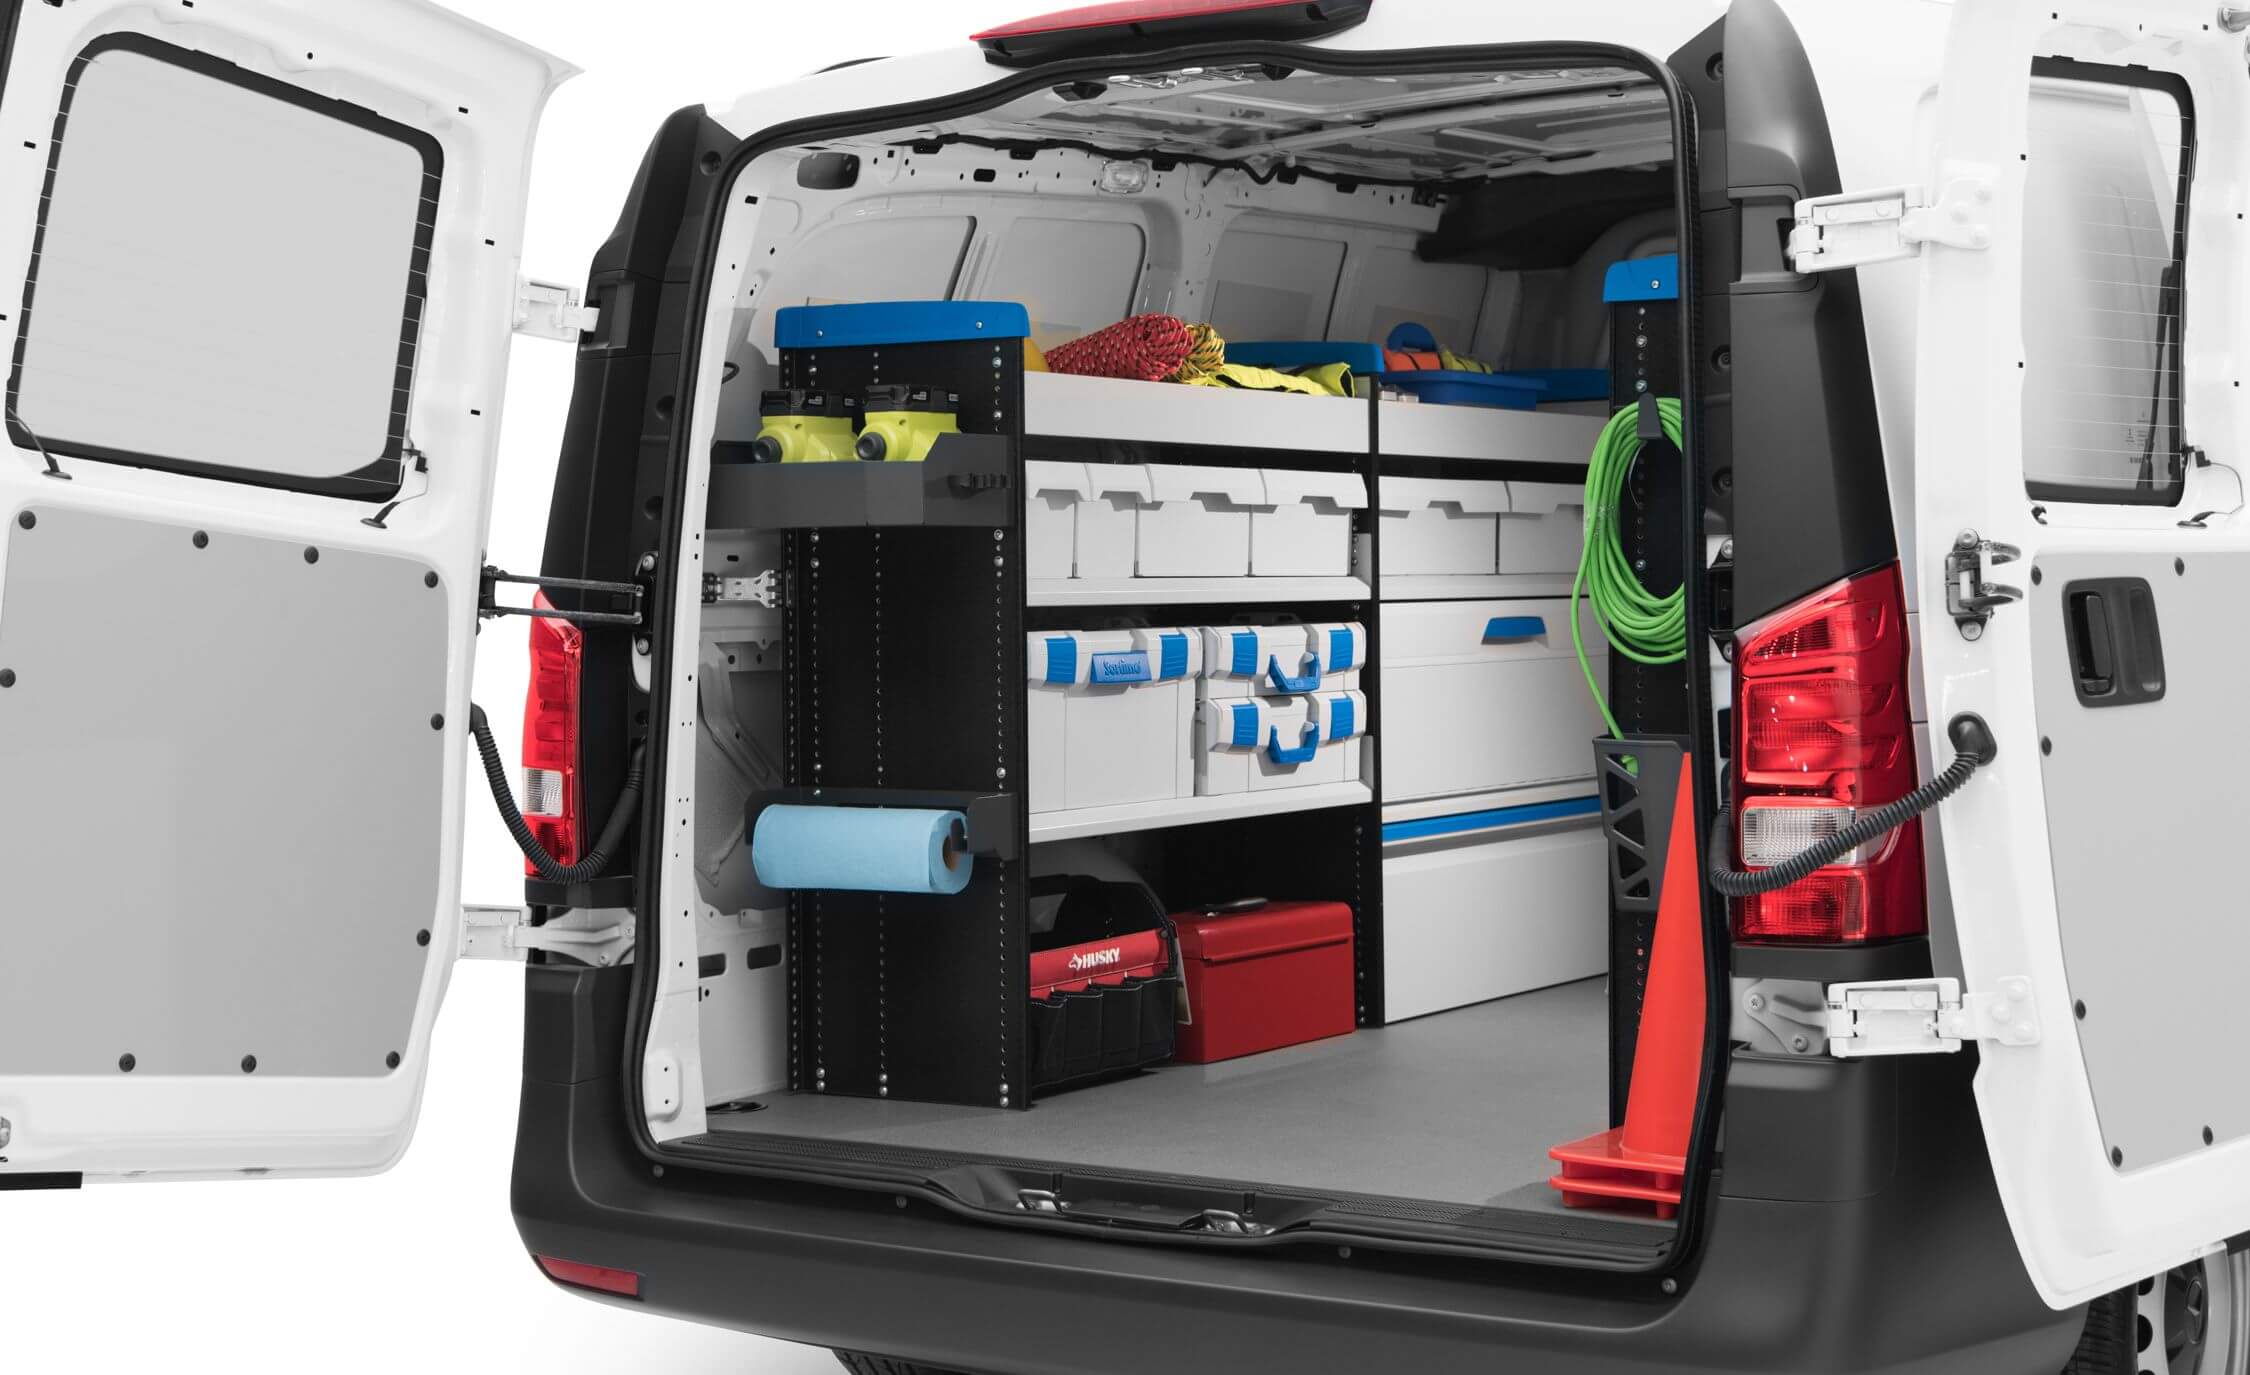 8 Most Recommended Cargo Vans by Professionals | Connecteam